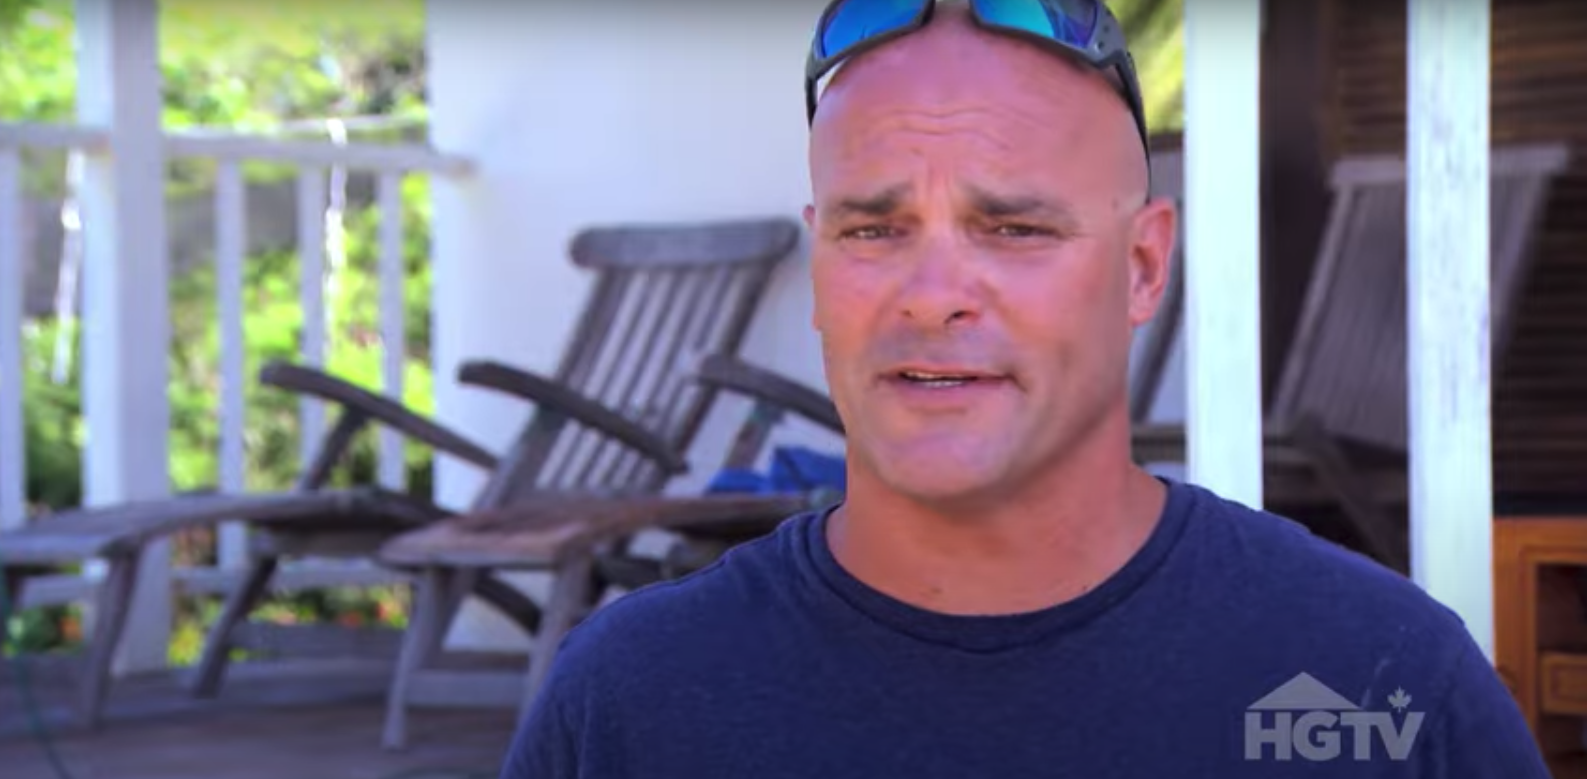 Bryan Baeumler with sunglasses on his head in an episode of HGTV's 'Renovation Island'